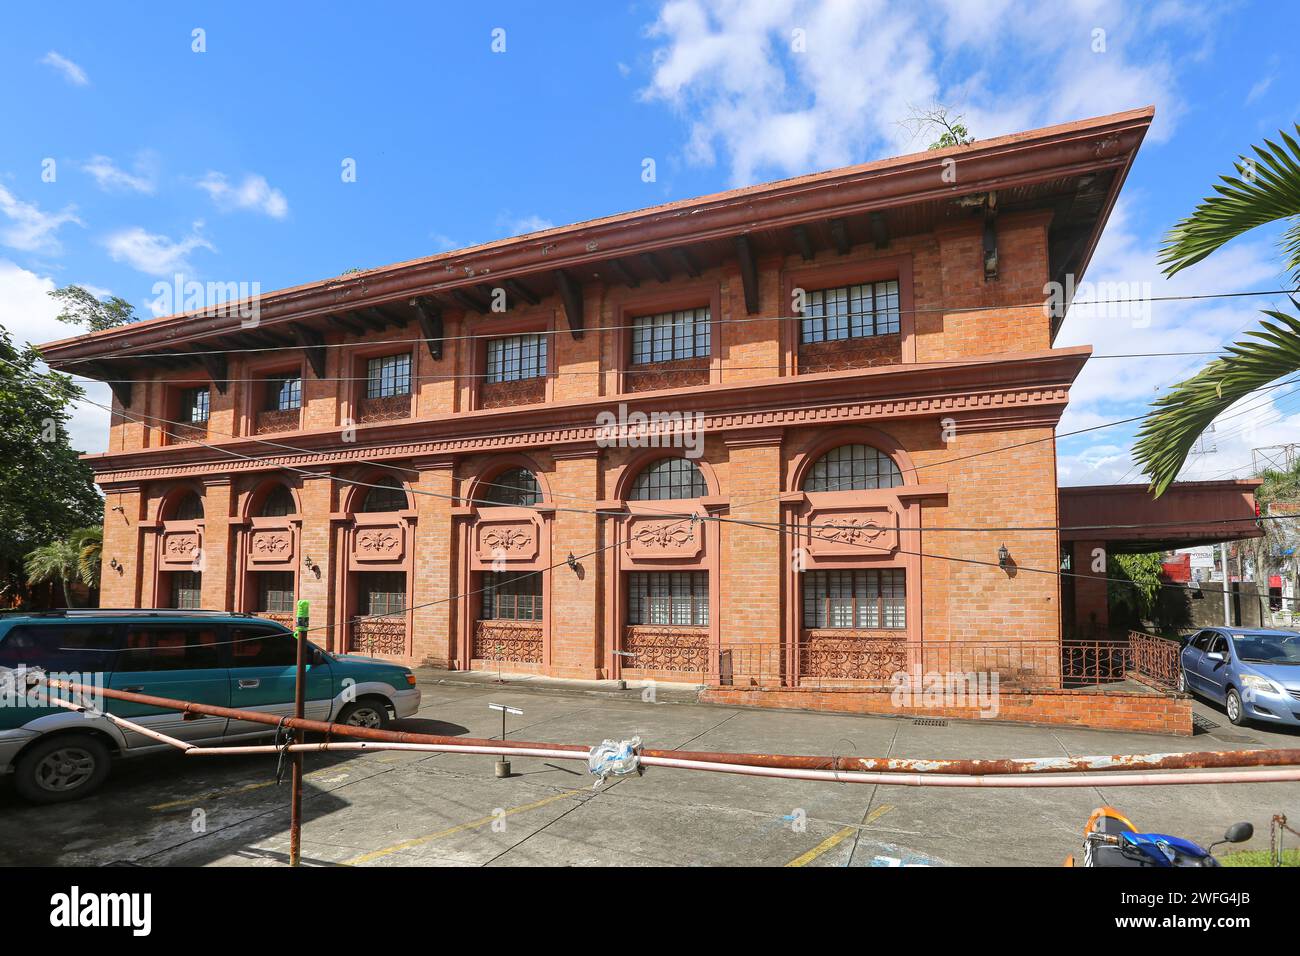 'Insular Life' insurance building in San Pablo, old architectural style with red bricks but built in 1992, Seven lakes city, Philippines architecture Stock Photo